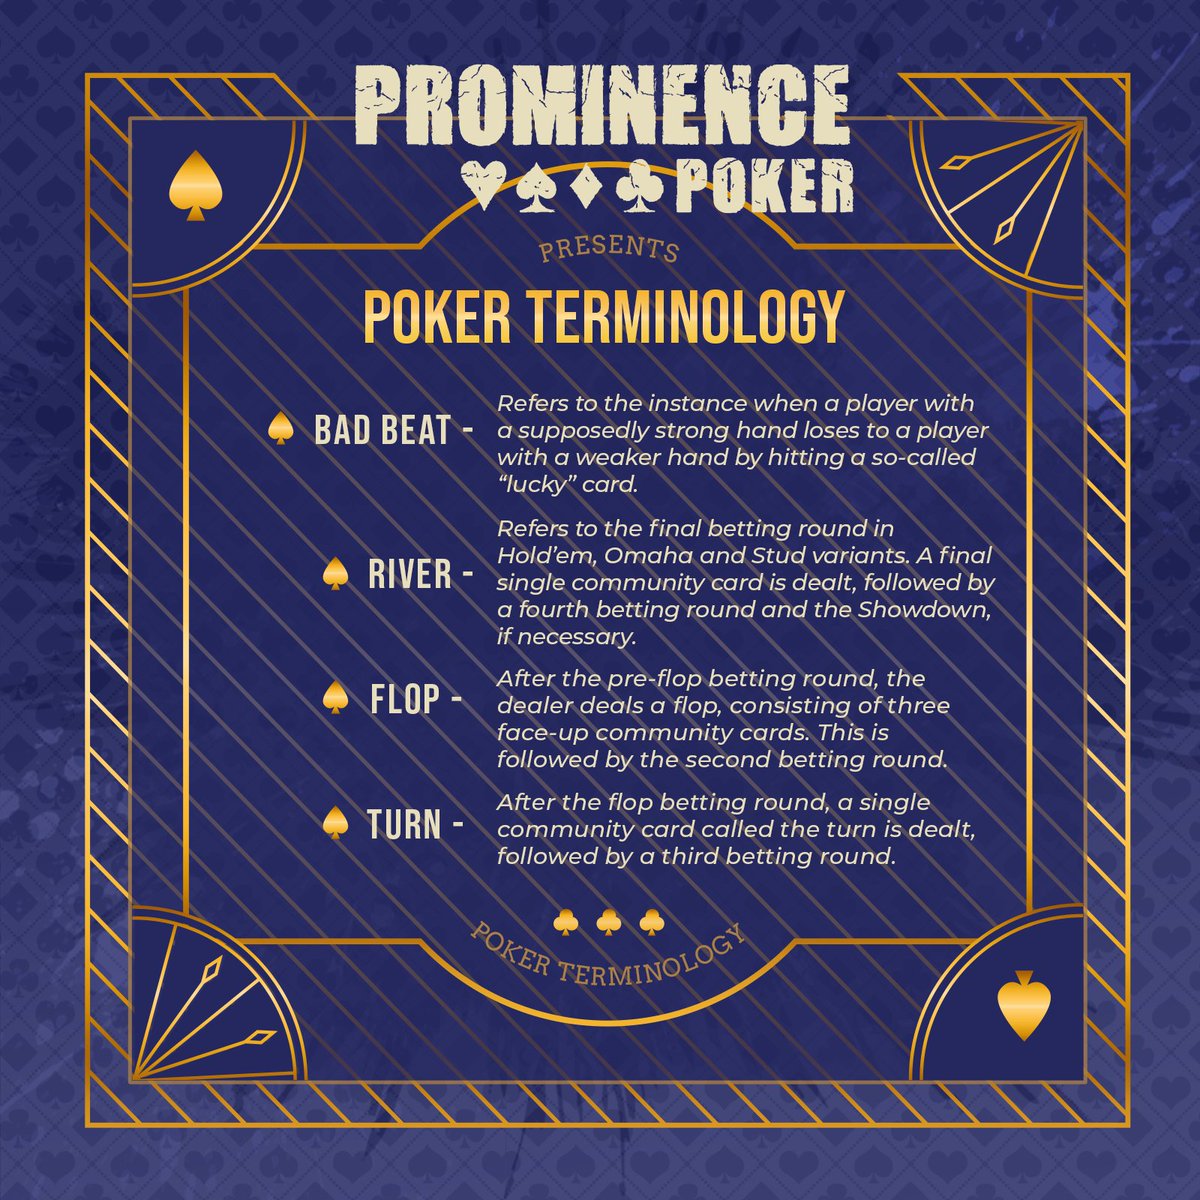 Have any friends you're trying to get into poker? Or maybe some of your friends could use all the help they can get? Either way, we're here to help you out. Here are some poker terms you might hear around the city of Prominence! ☝️🤓